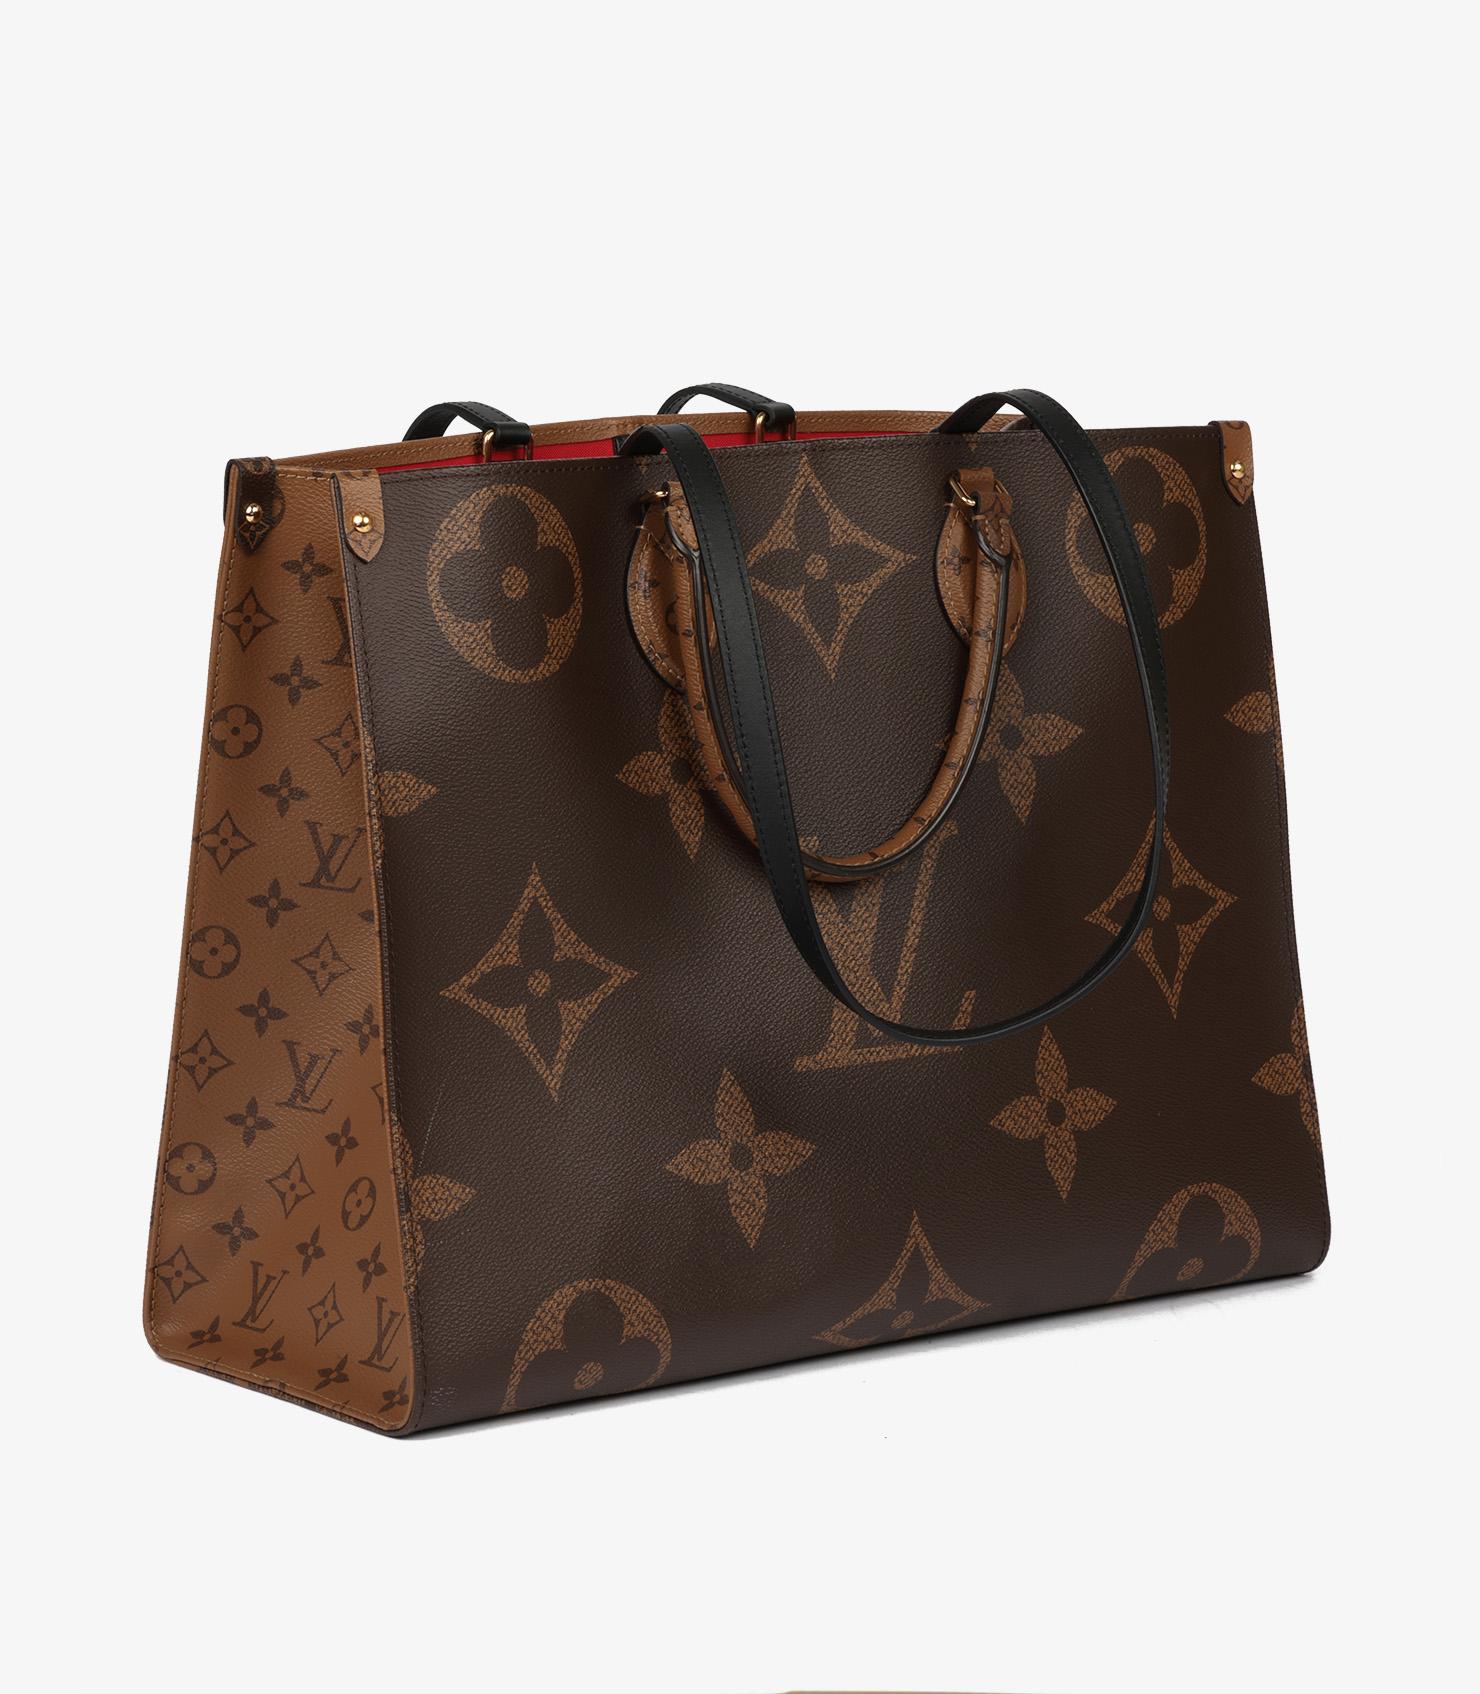 Louis Vuitton Brown Monogram & Reverse Monogram Coated Canvas Onthego GM

Brand- Louis Vuitton
Model- Onthego GM
Product Type- Shoulder, Tote
Serial Number- AR****
Age- Circa 2020
Accompanied By- Louis Vuitton Dust Bag, Box, Ribbon, Care Booklet,